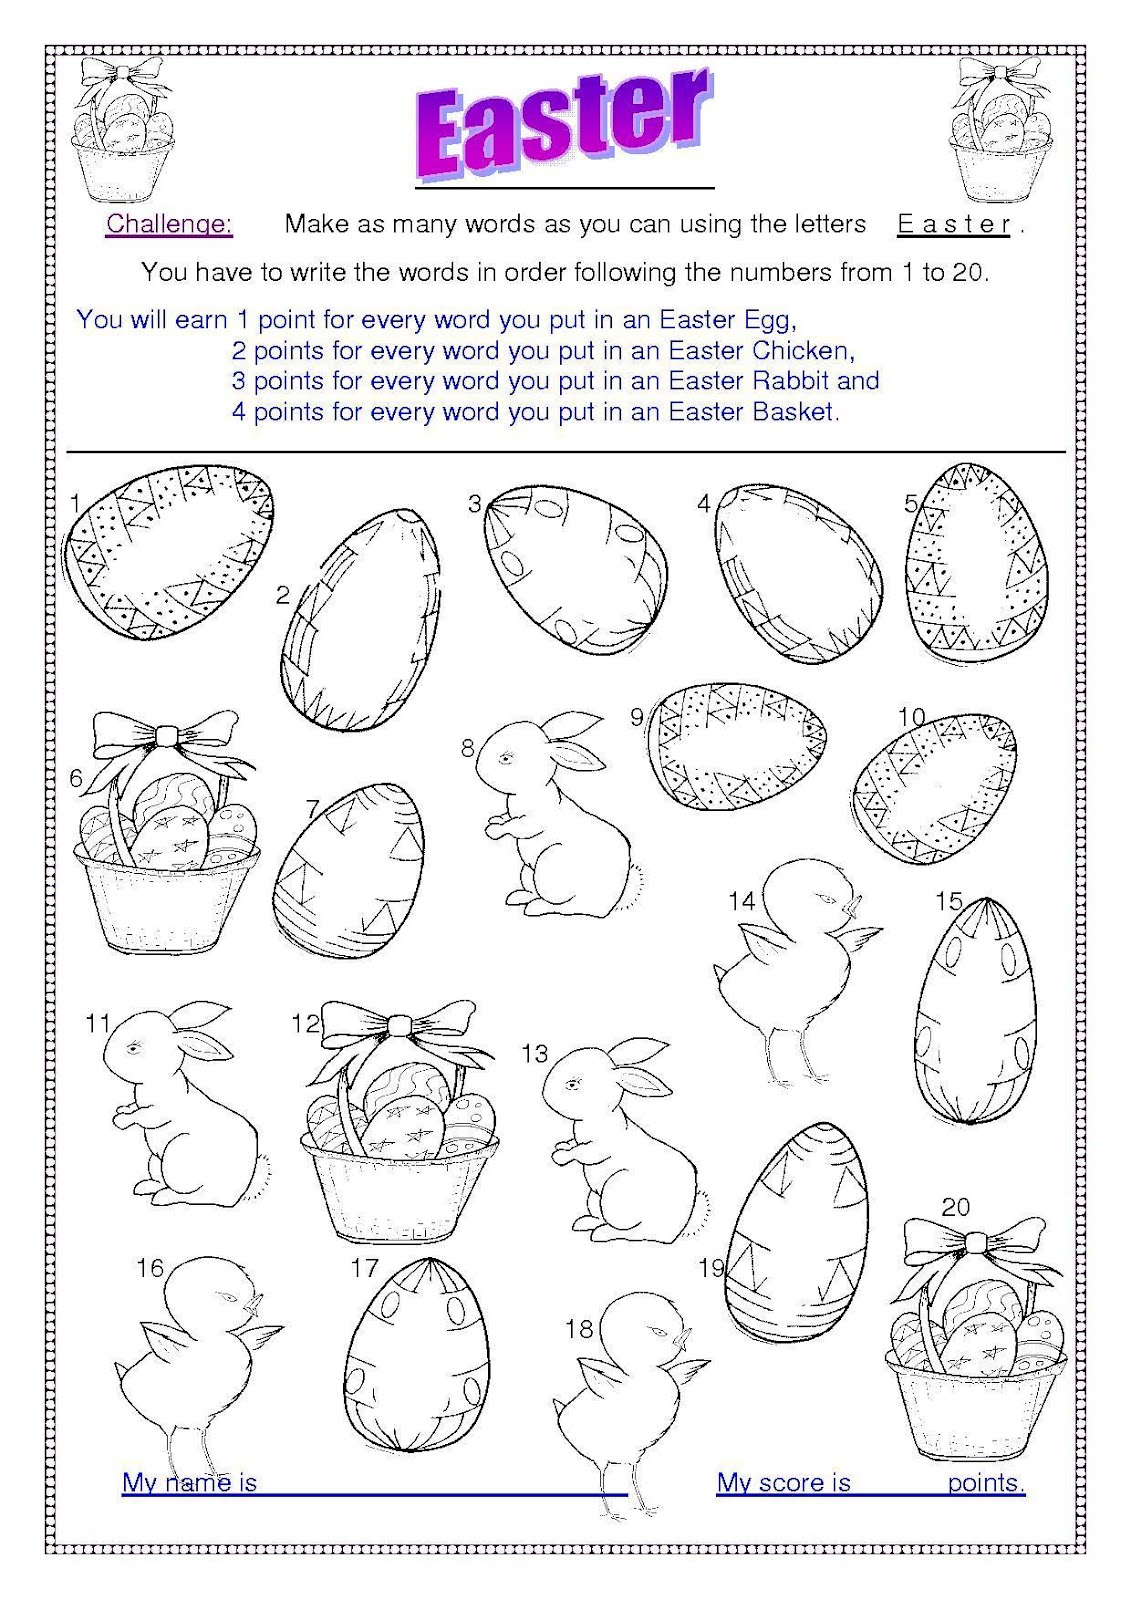 23-activity-sheets-for-kids-free-coloring-pages